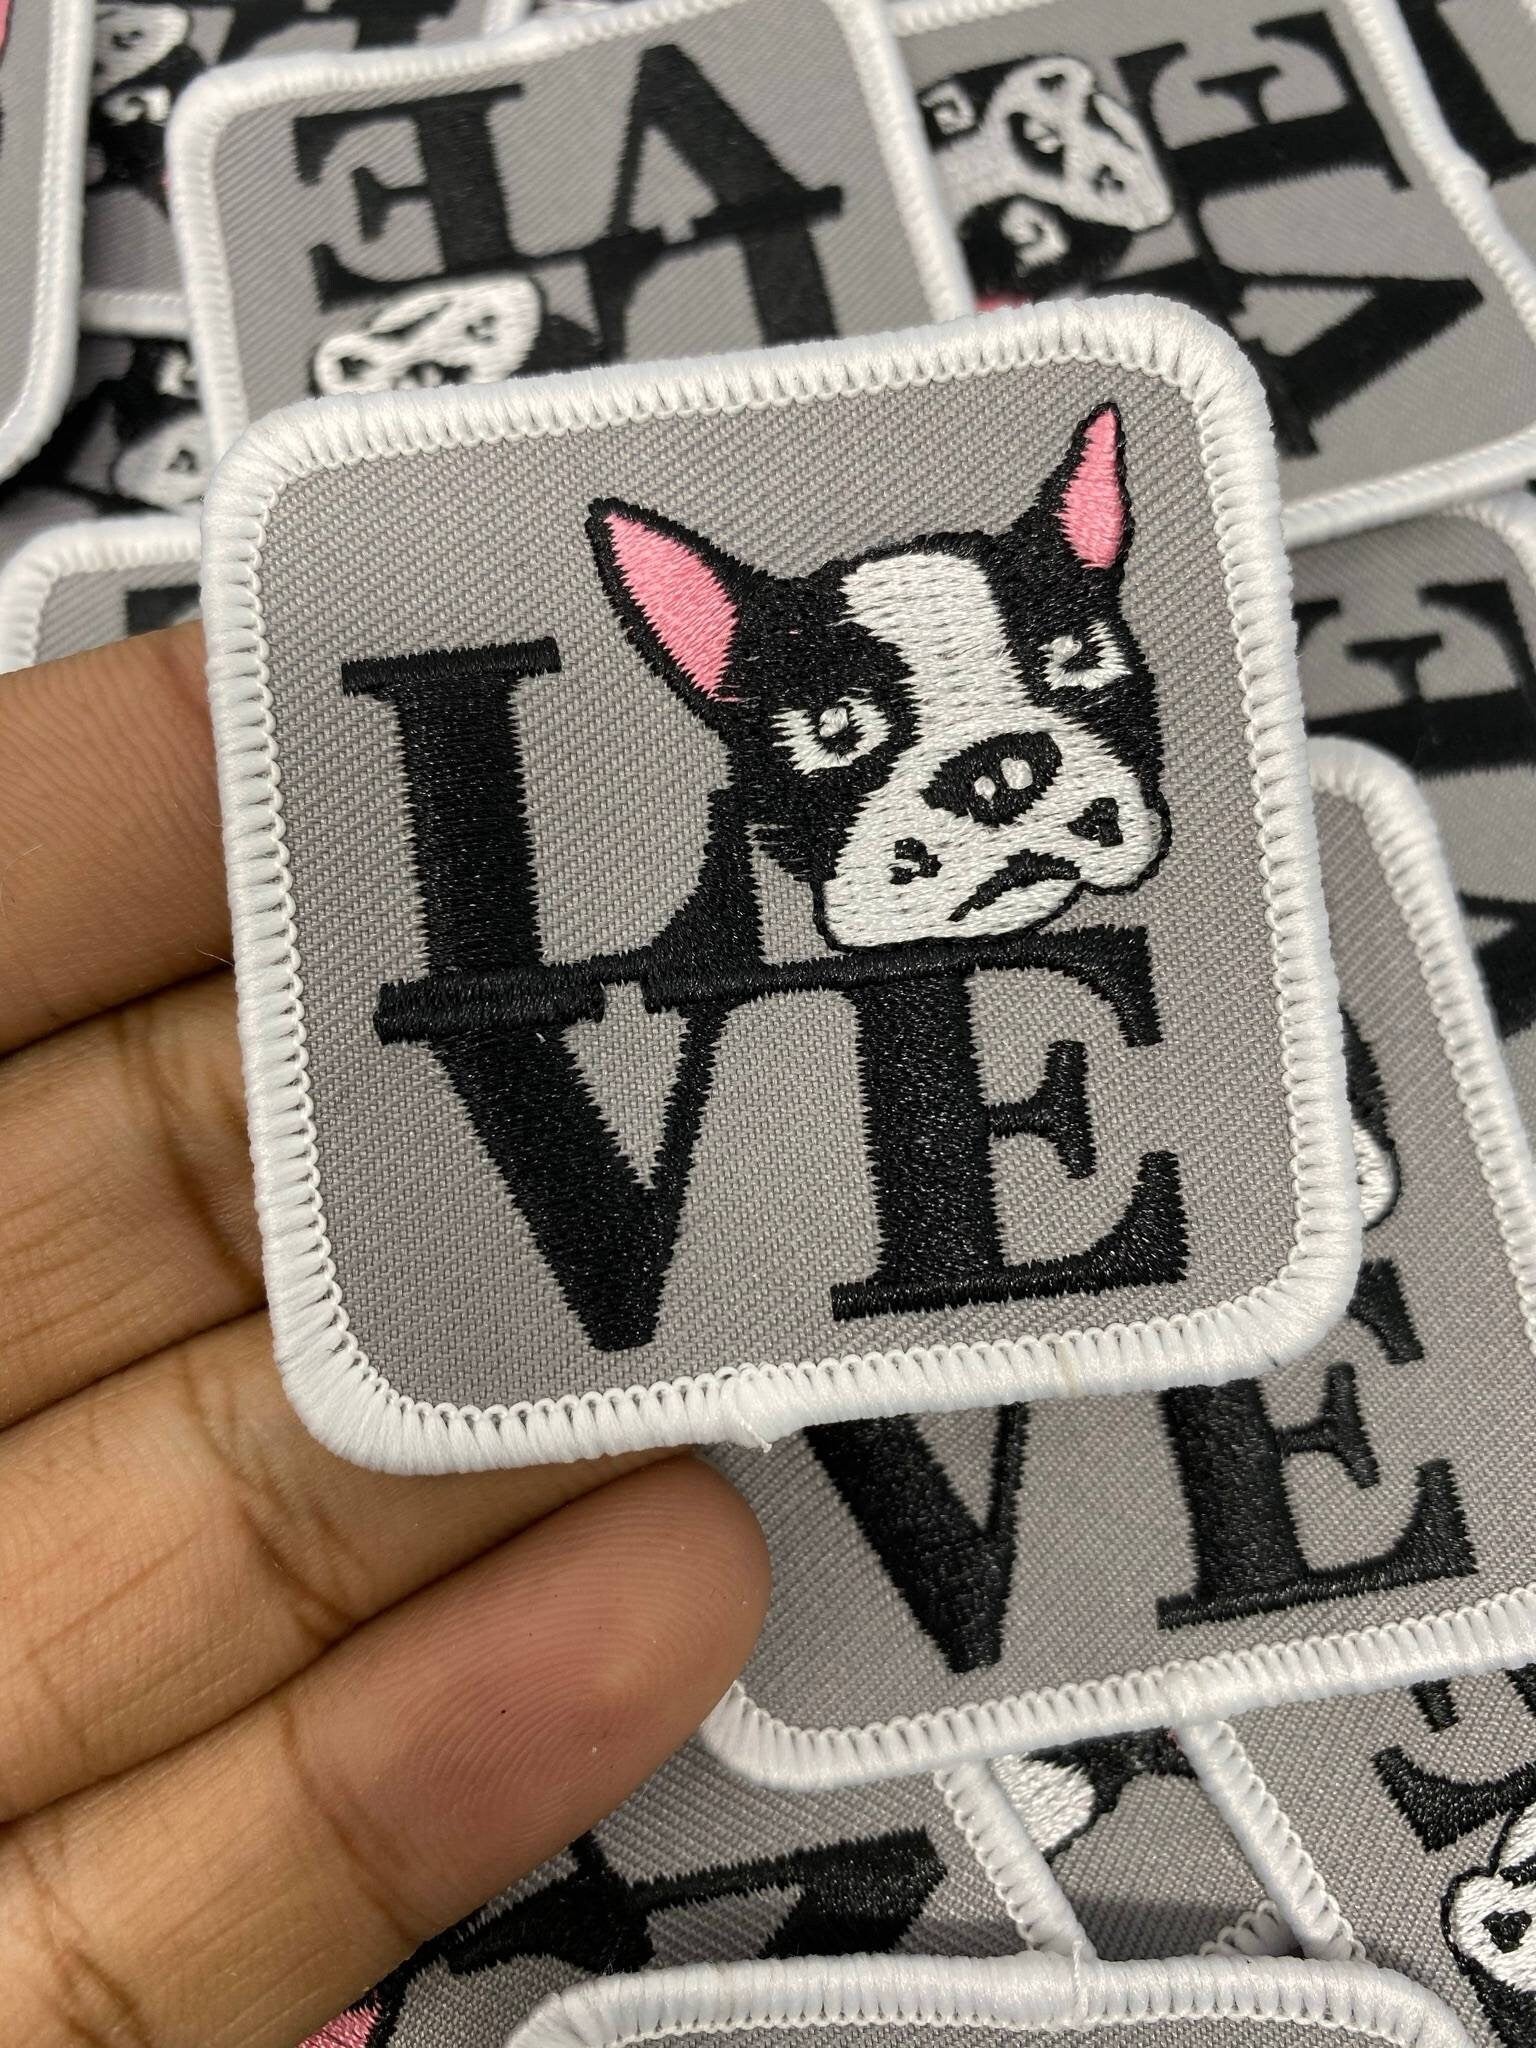 Patched Up Pup: "Puppy Love" Iron-on Embroidered Patch for Dogs, Patch for Dog Lovers, Gift for Your Dog, Sz. 2.5", Doggie Vest